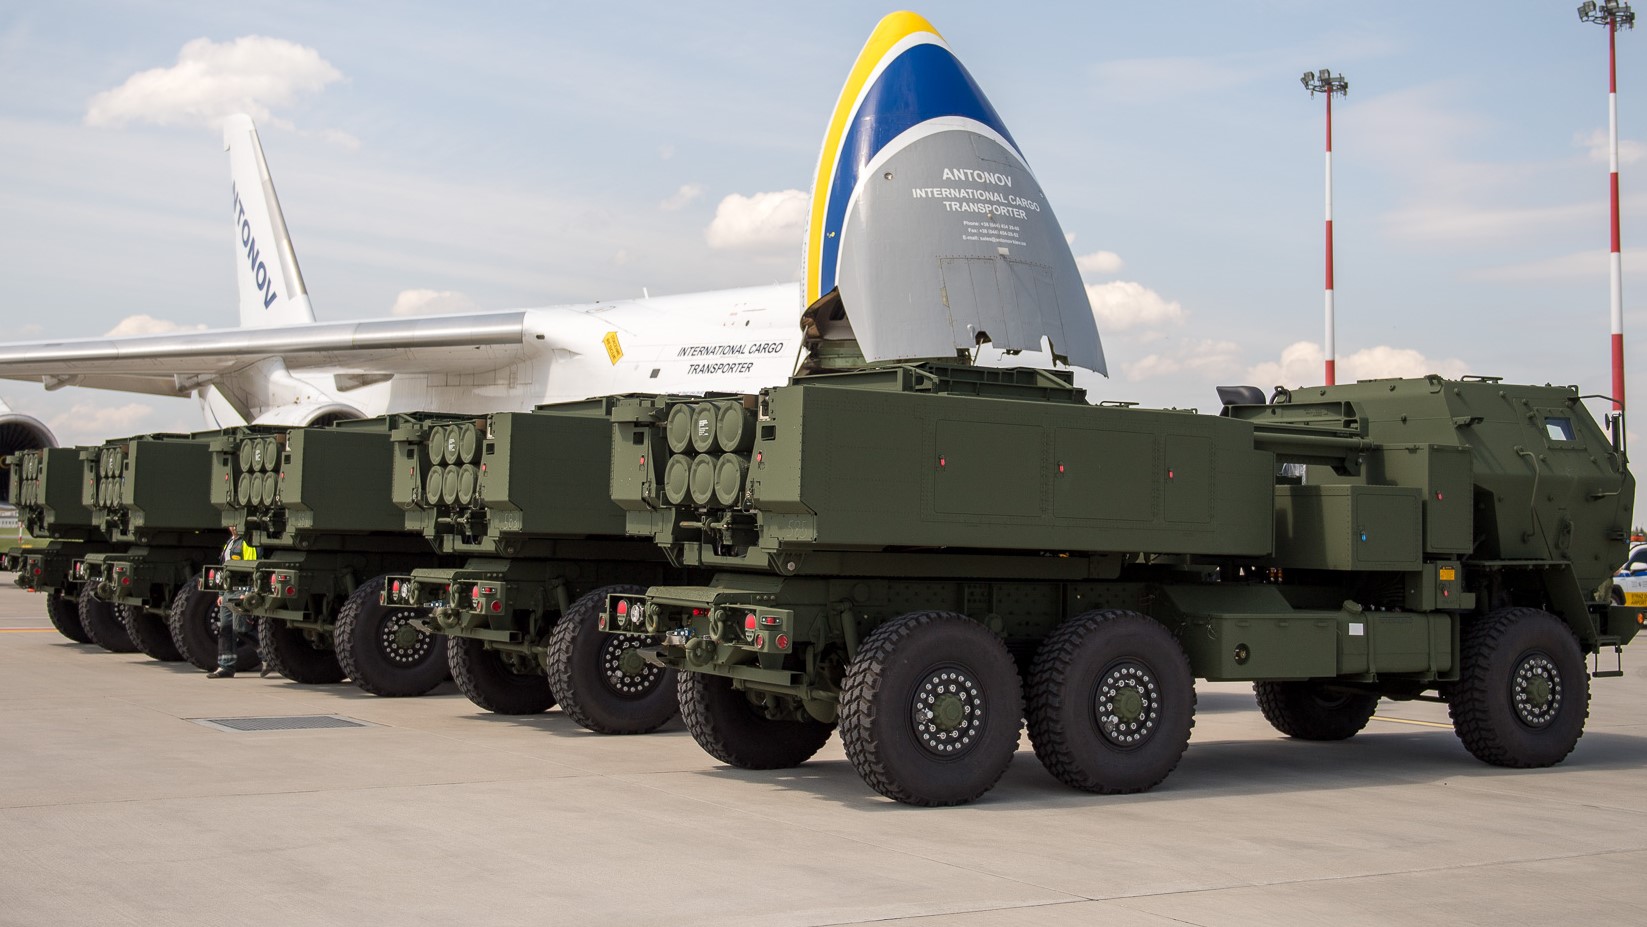 Ukrainian AN-124 aircraft deliver first HIMARS to Poland - $655m contract includes 20 missile systems, 30 ATACMS and 270 GMLRS rounds